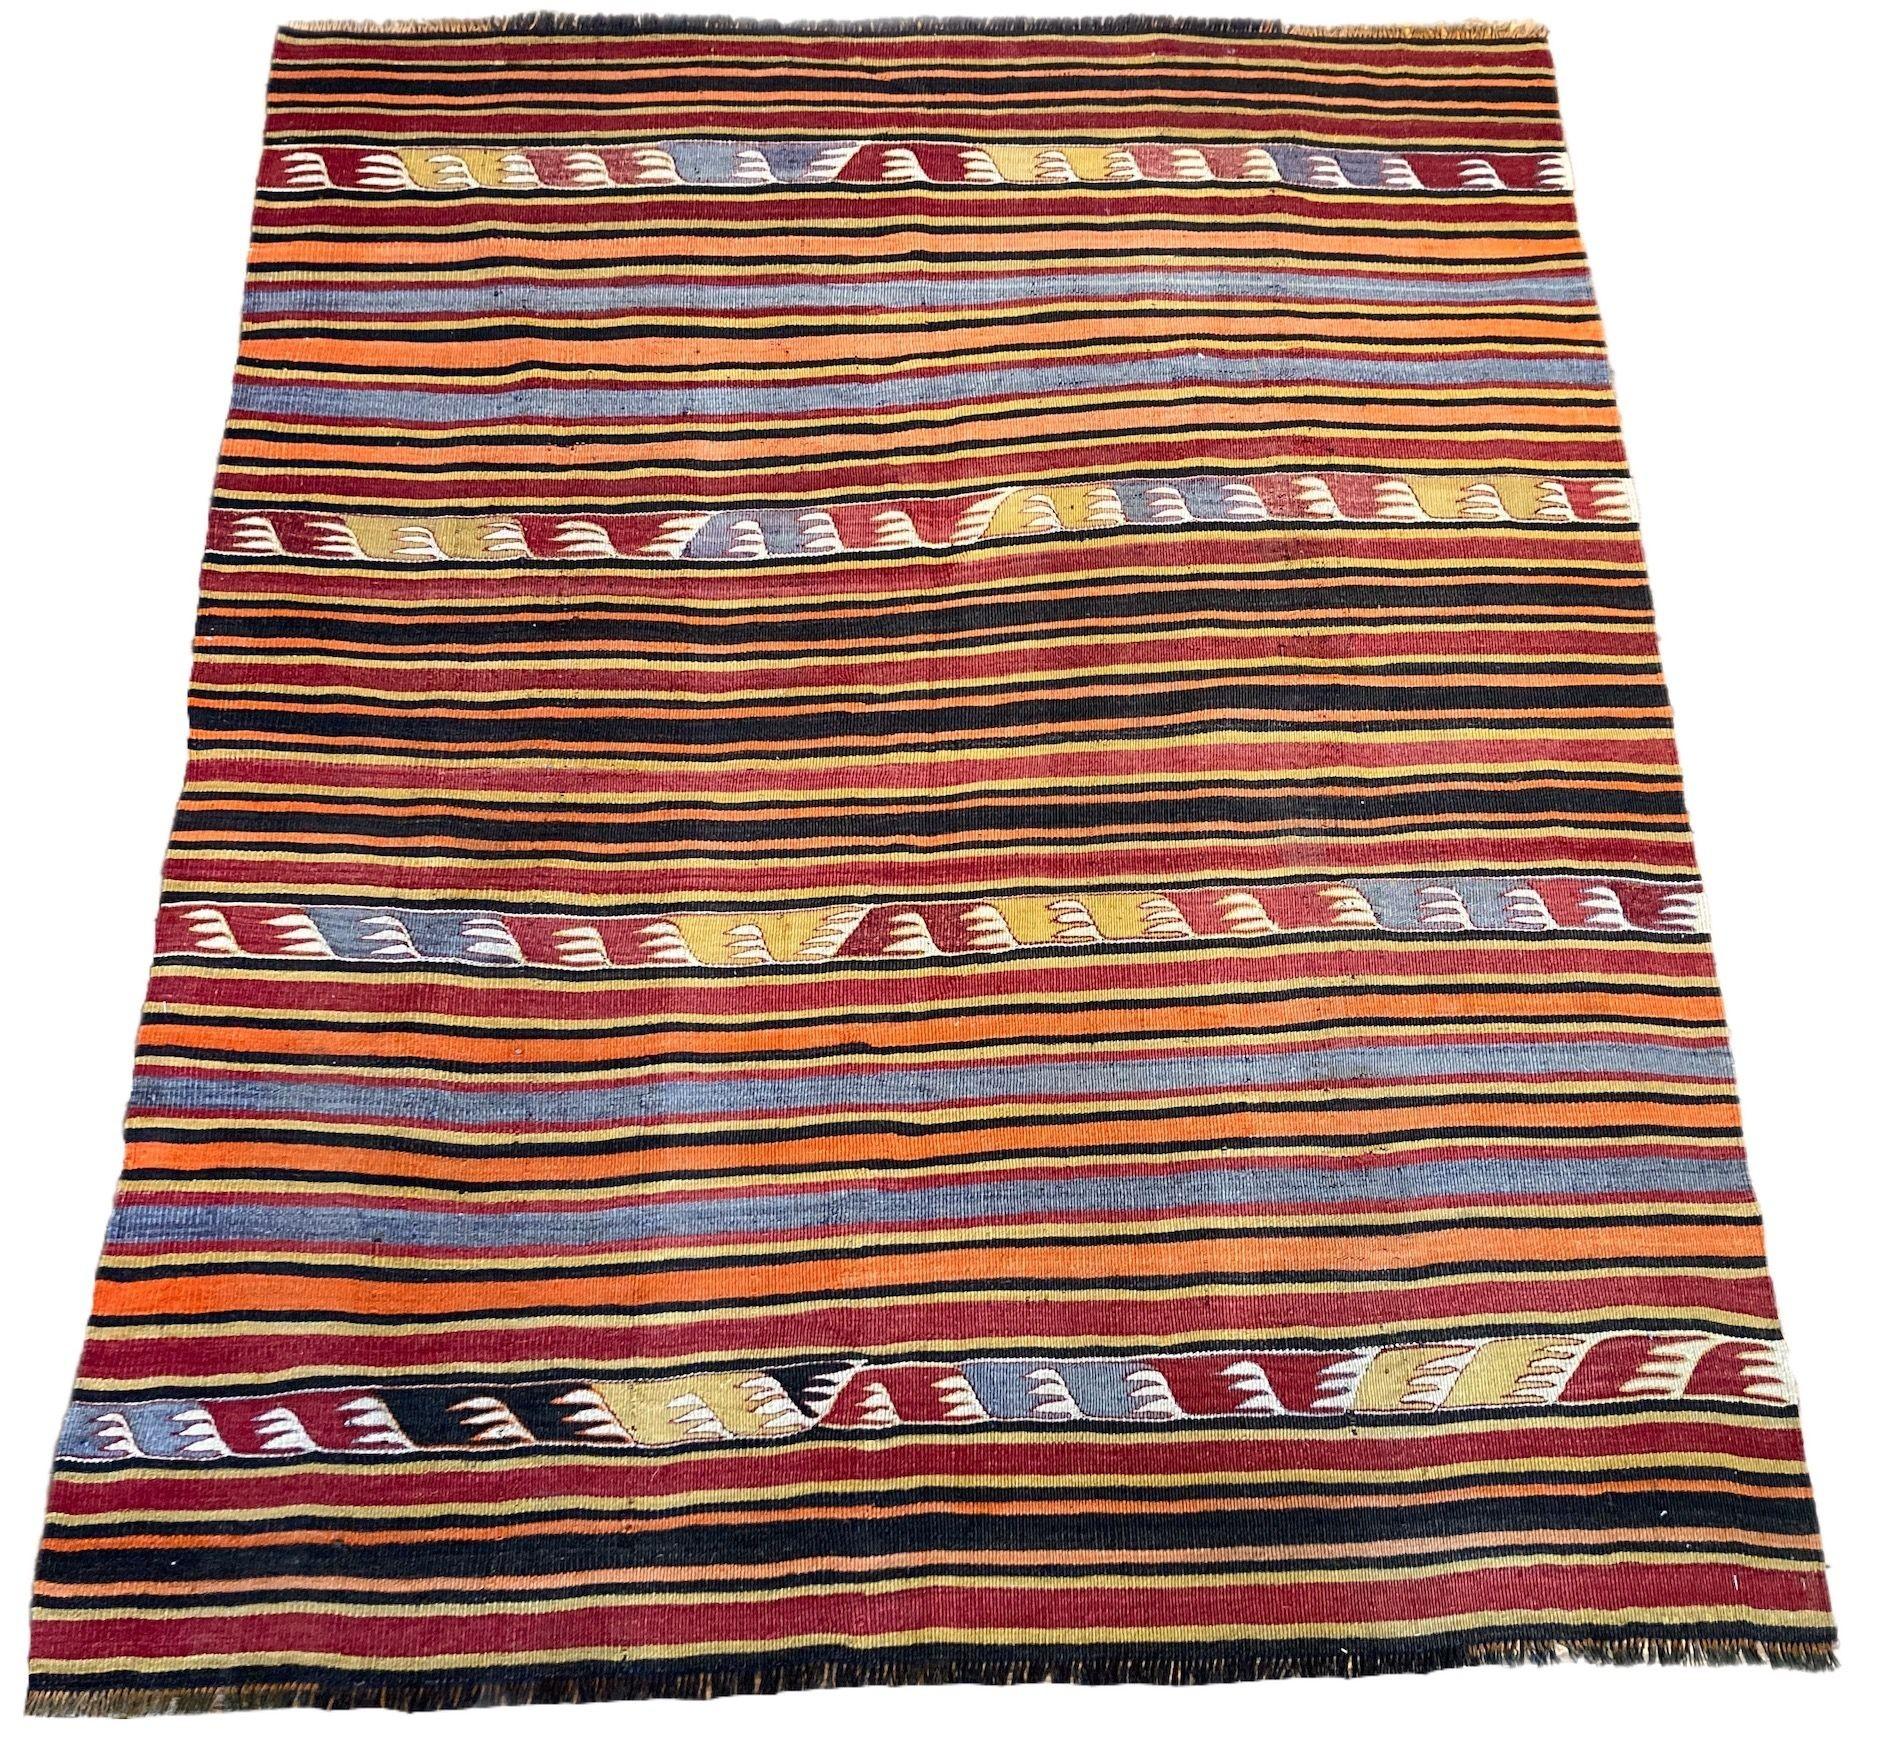 A lovely vintage kilim, handwoven in central Turkey circa 1960 featuring a multicoloured banded design in reds, terracottas, blues and golds.
Size: 1.70m x 1.42m (5ft 7in x 4ft 8in)
This kilim is in good condition with light, age related wear. The